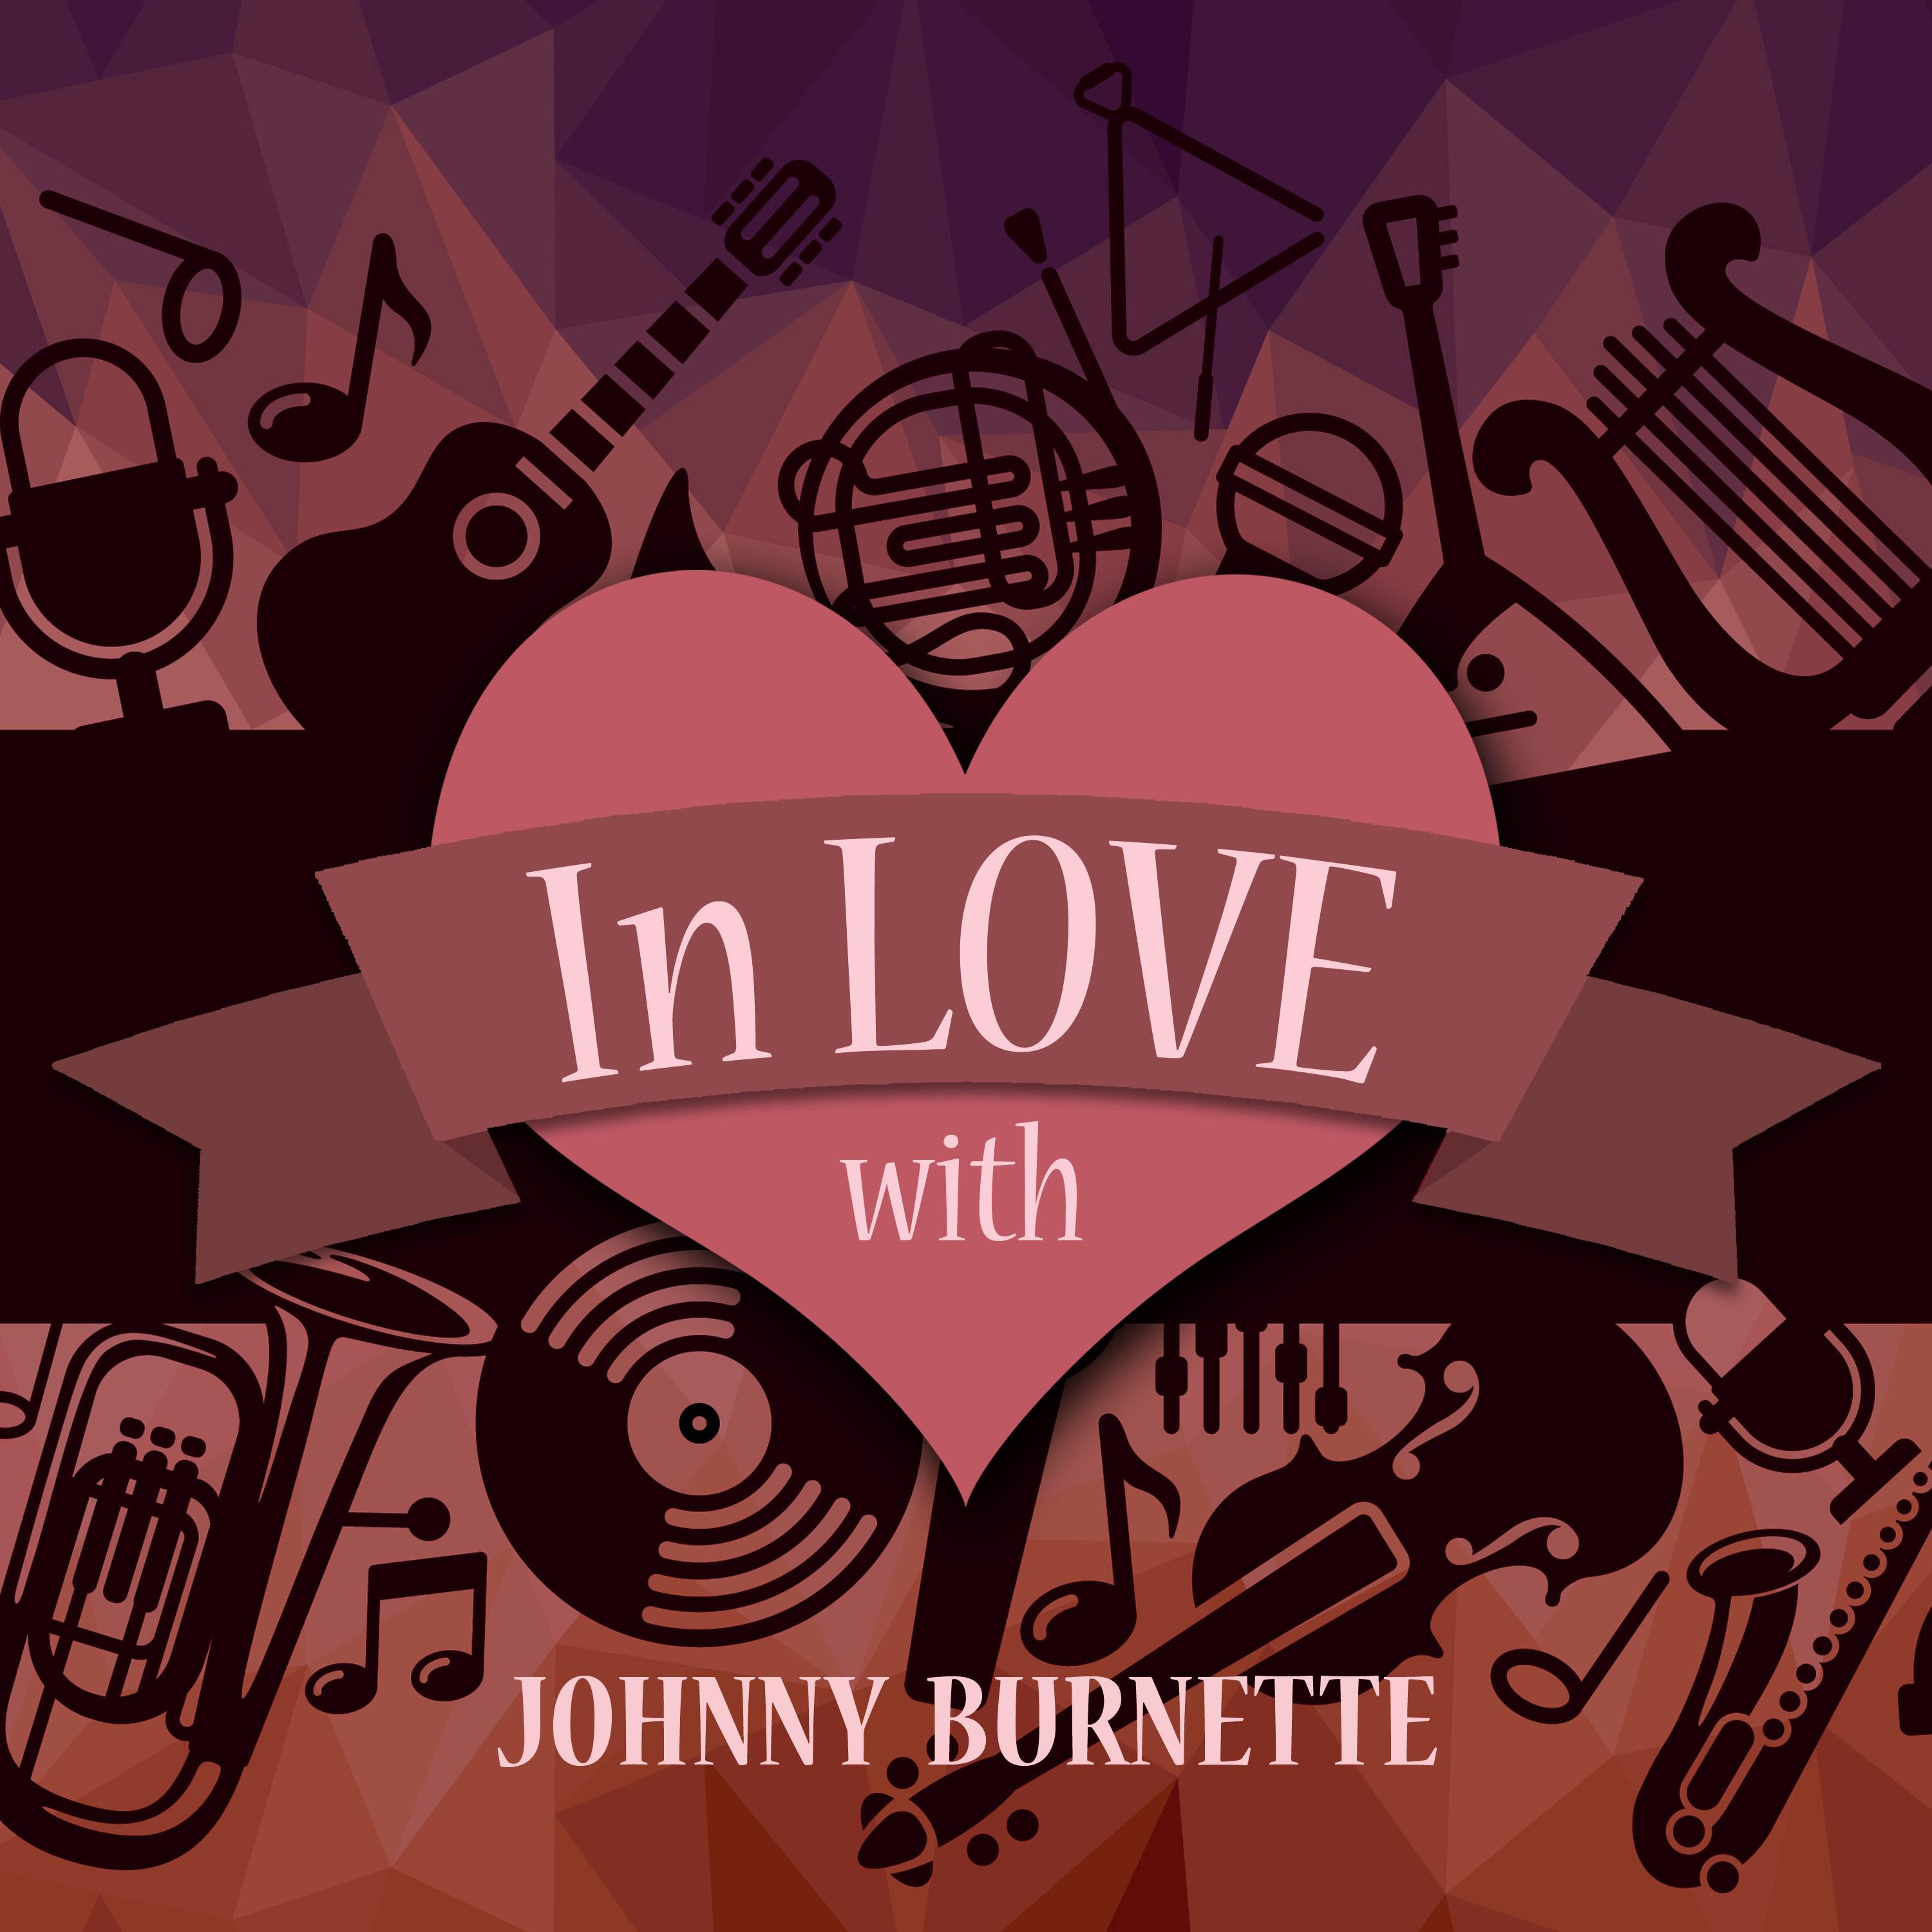 In Love with Johnny Burnette